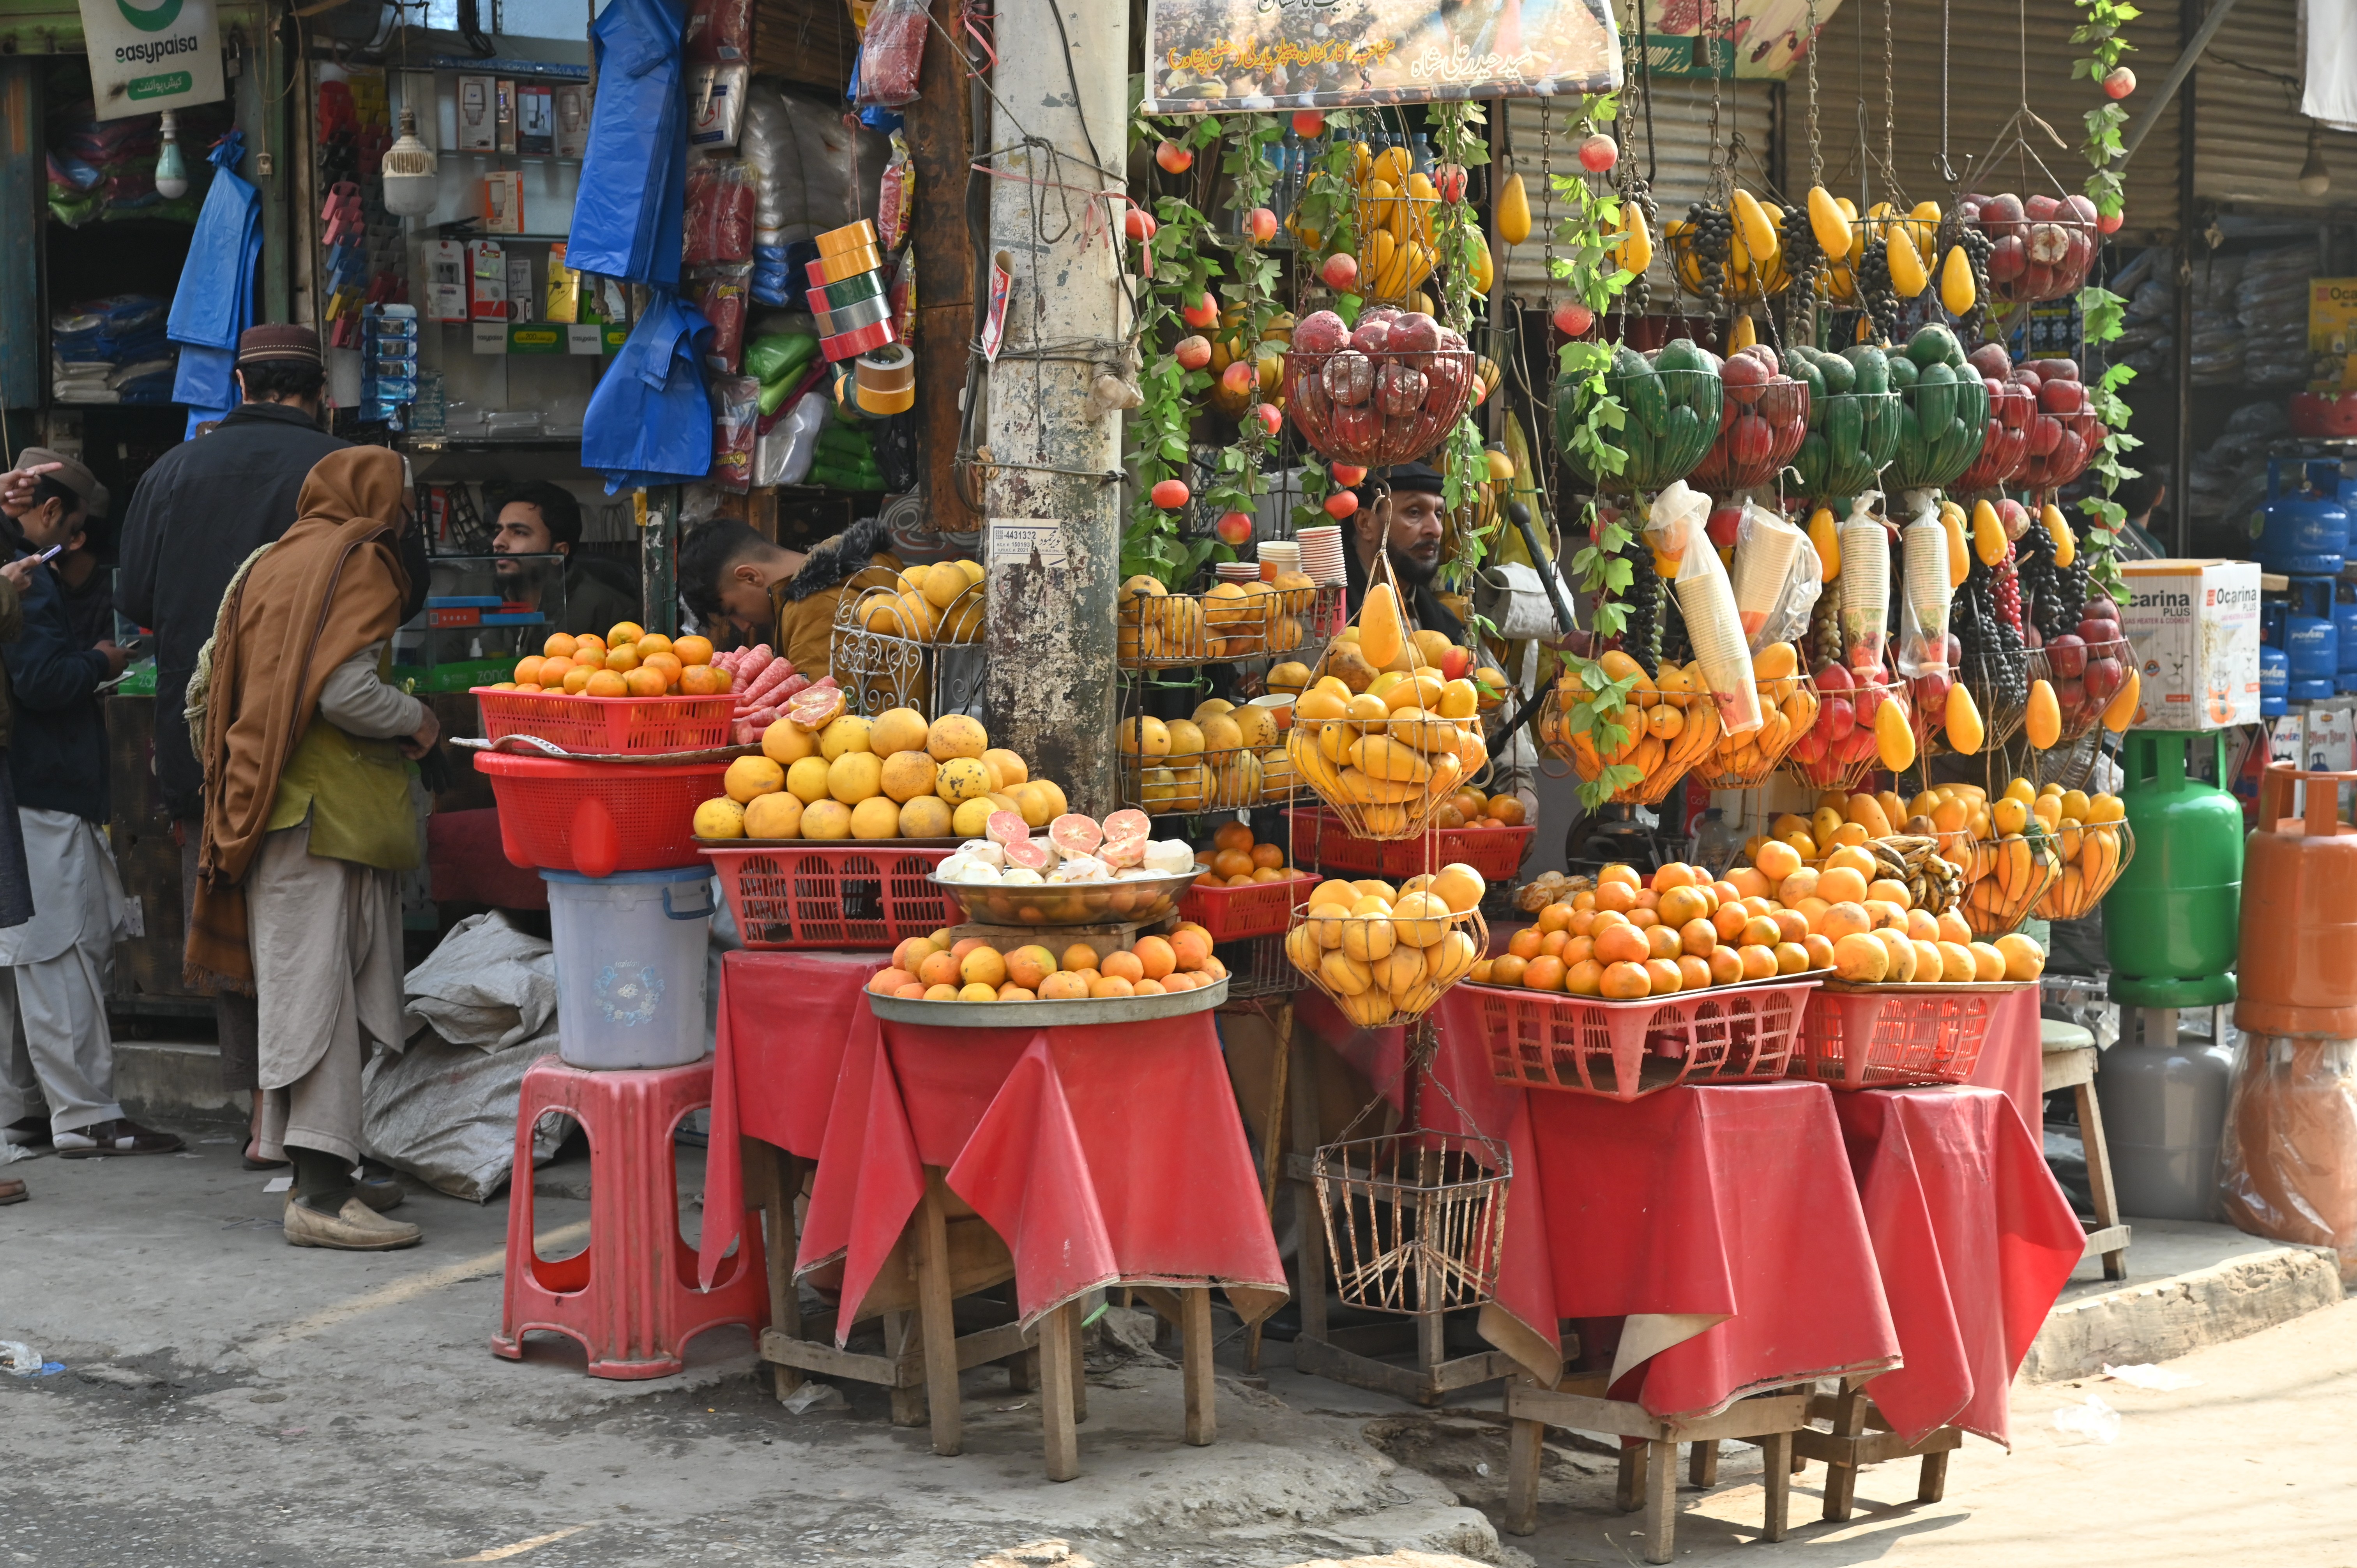 A man selling fruits